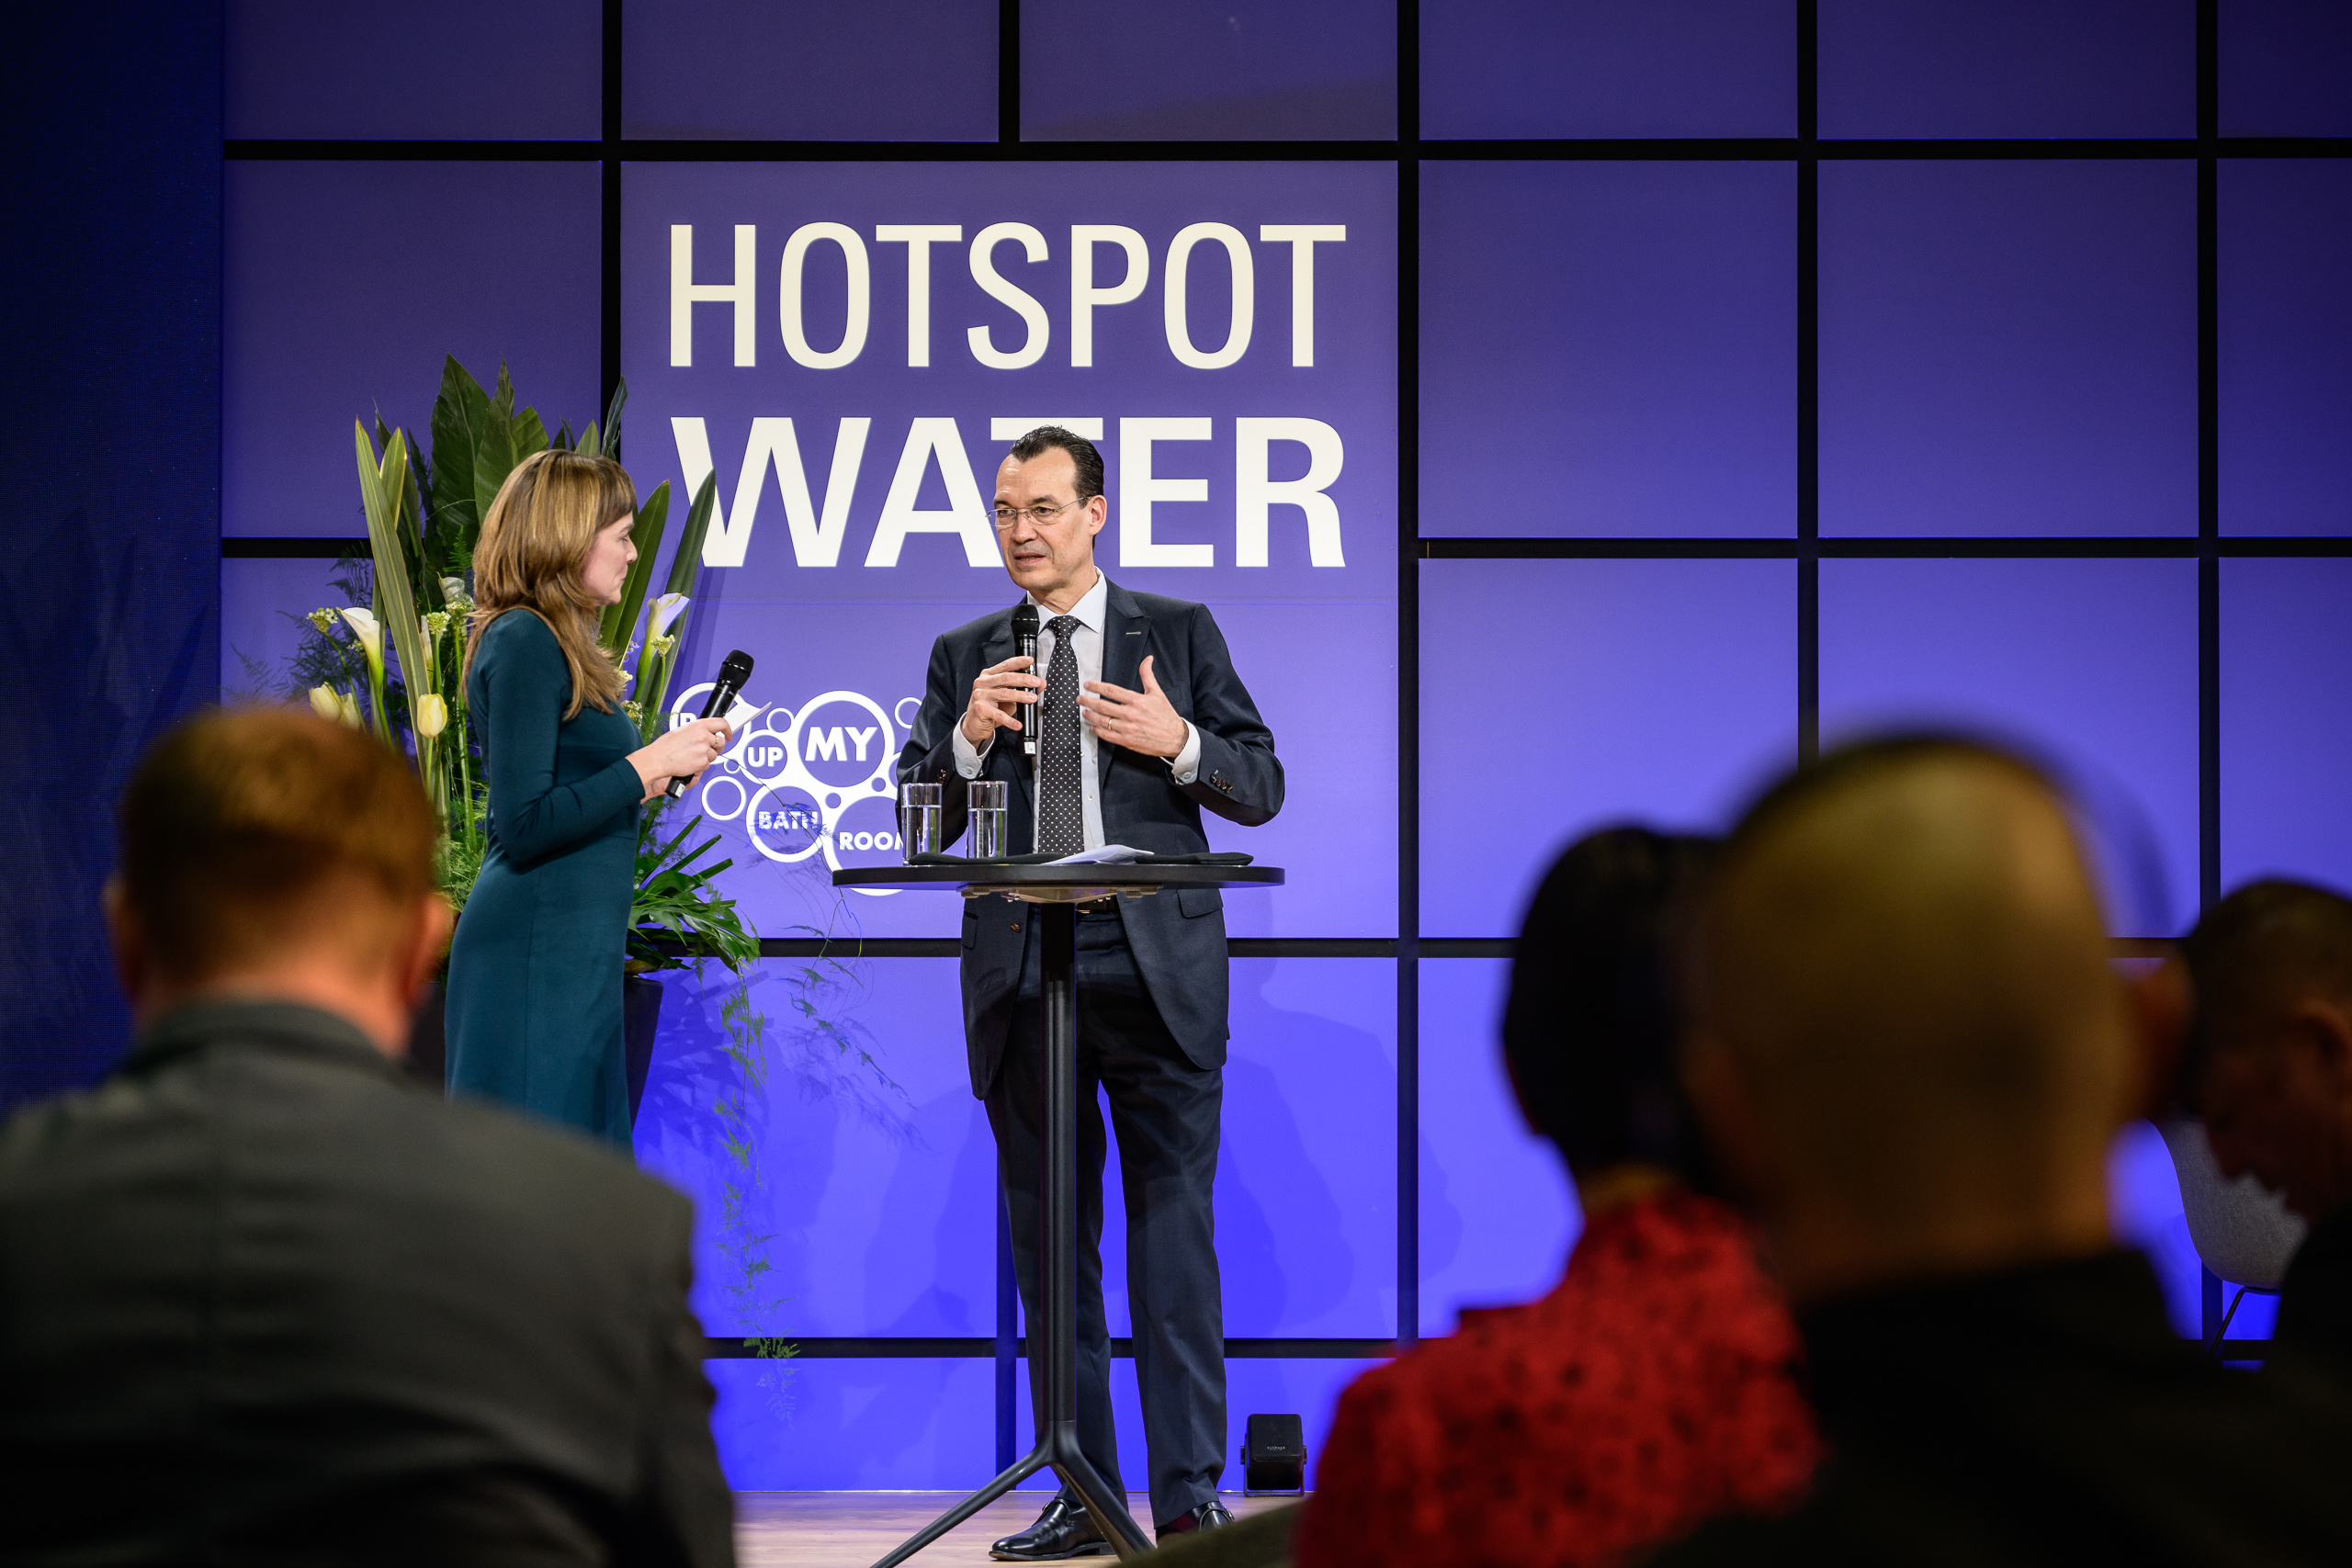 Lecture at Hotspot Water